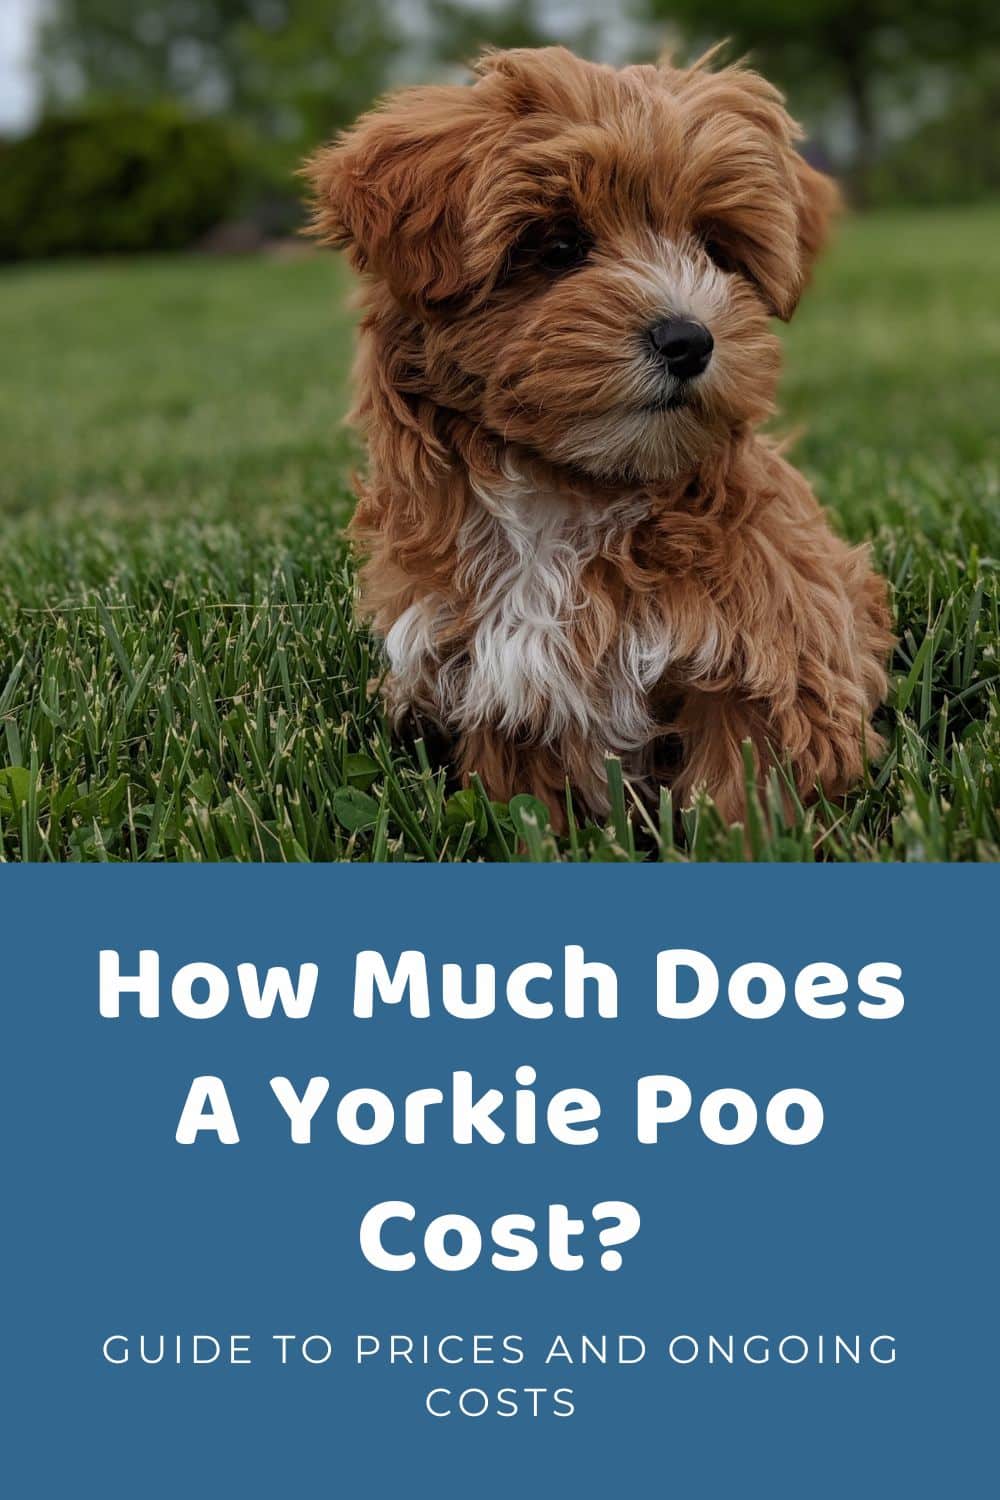 Yorkie Poo Price Overview of Pricing Factors & Ongoing Costs